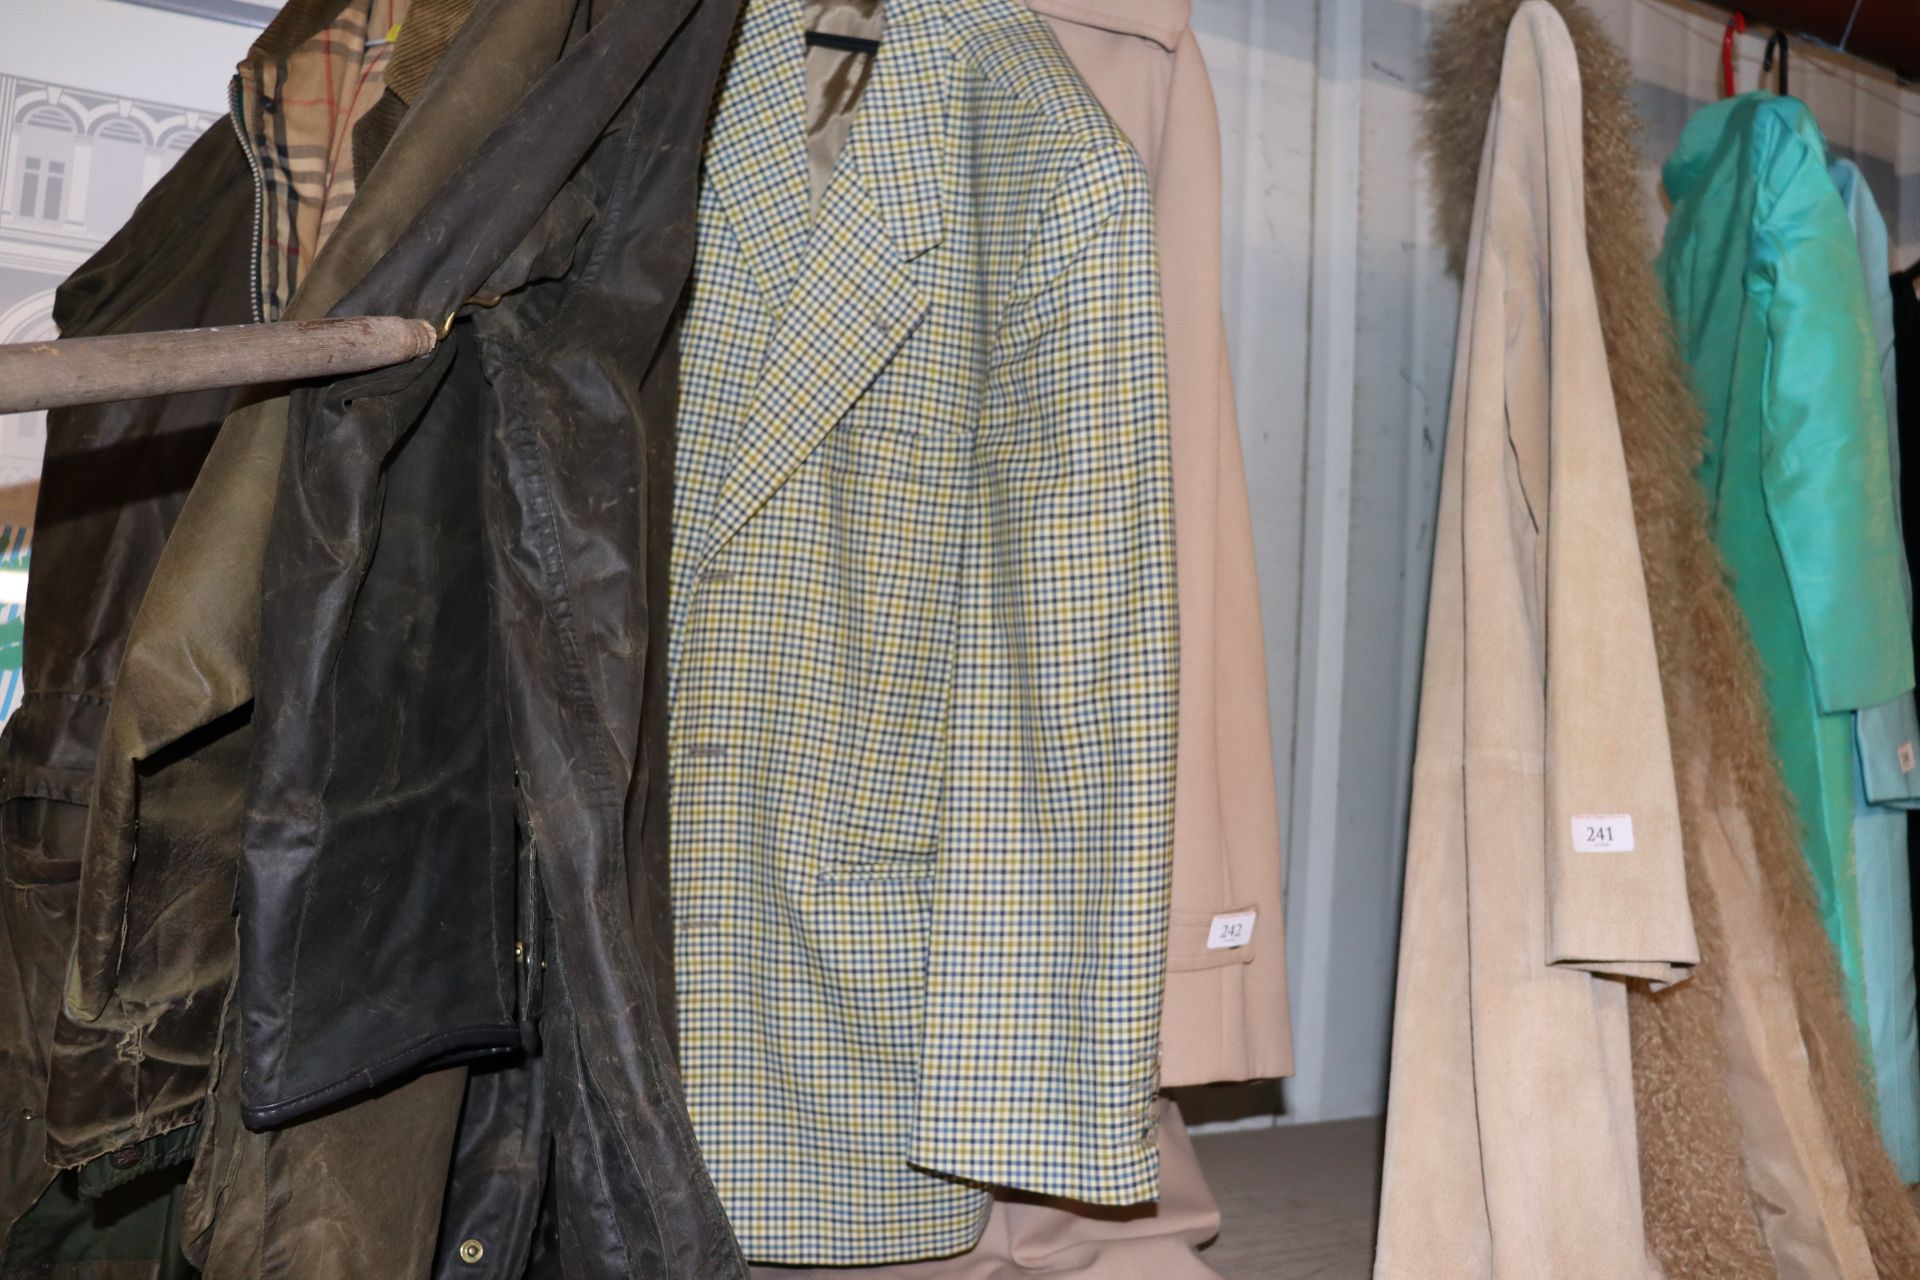 Four items of men's clothing Burberry, Barbour wax - Image 6 of 6